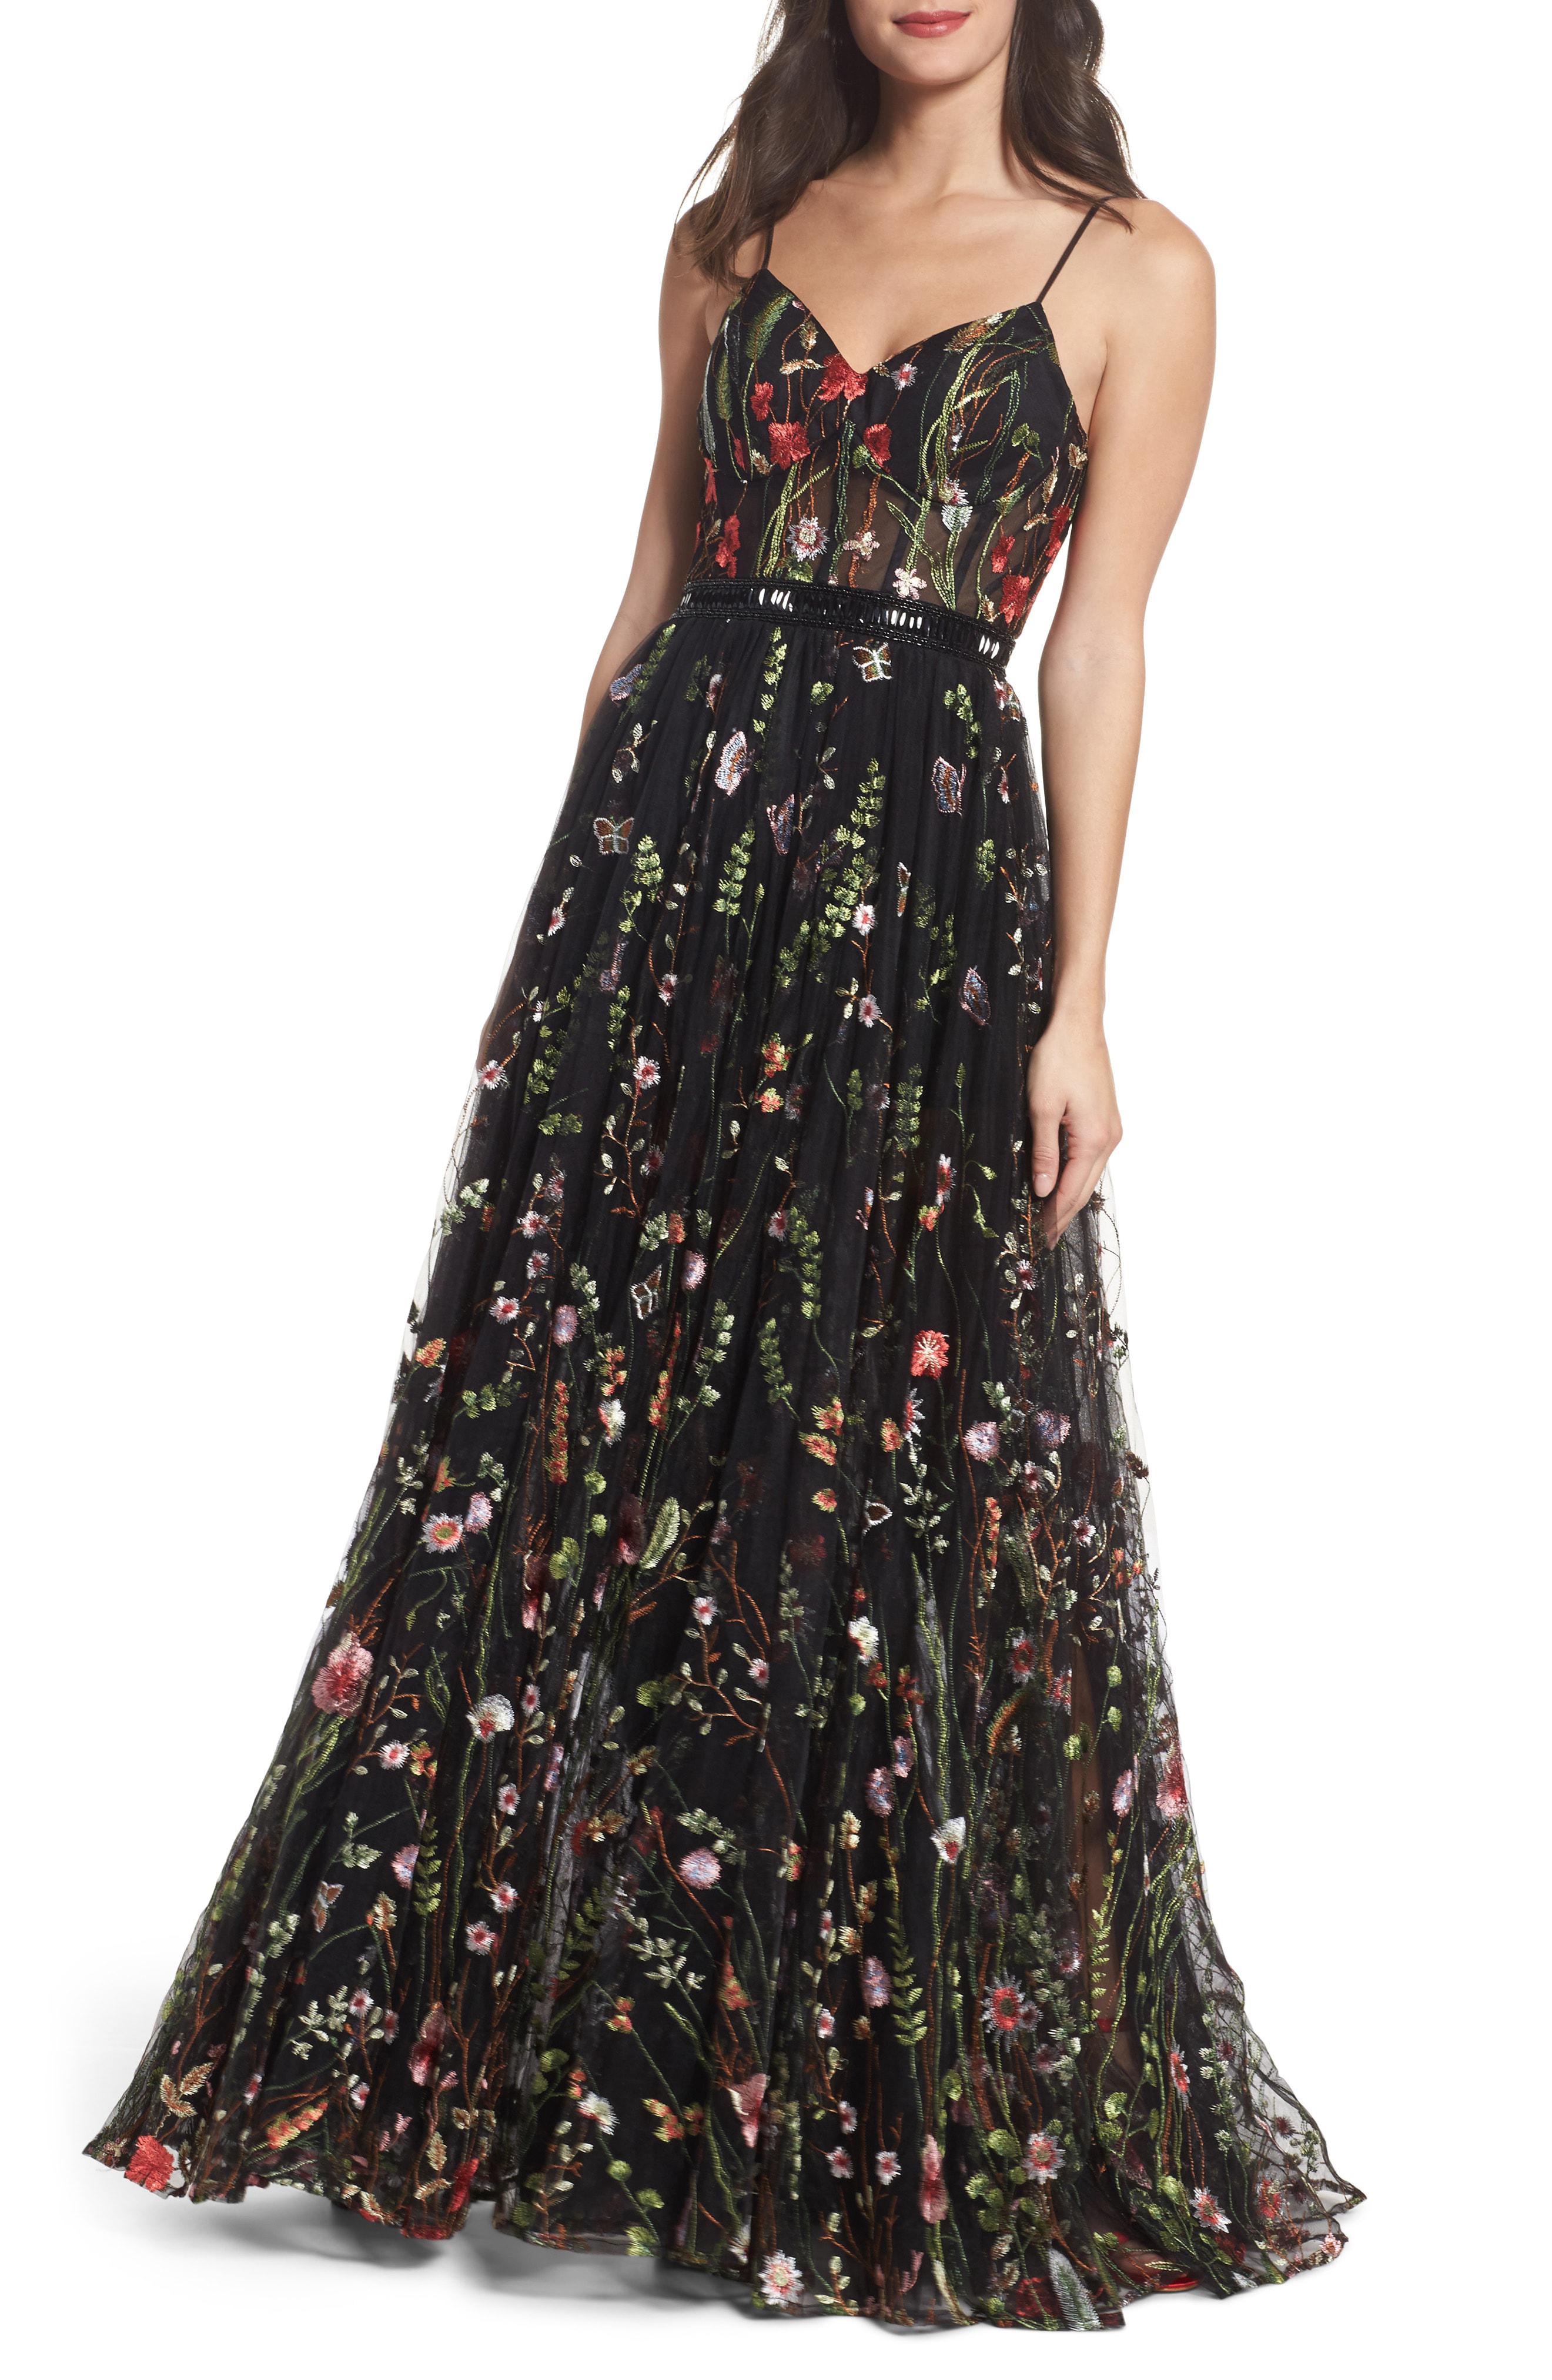 Lyst - Mac Duggal Embroidered Bustier Gown in Black